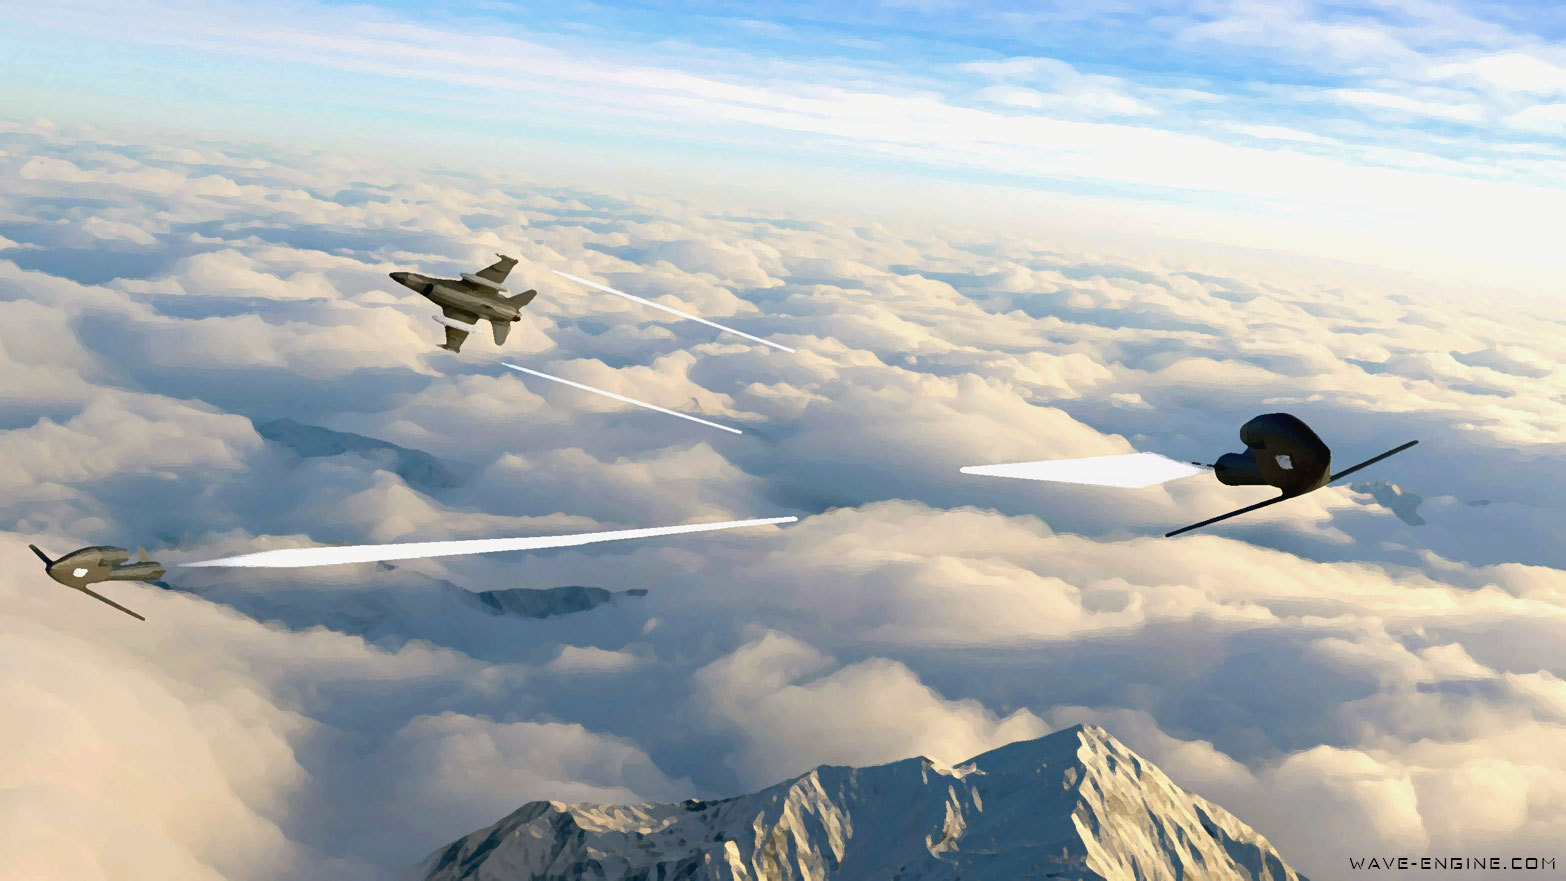 Artist’s impression of Wave Engine Corp.’s Versatile Air-Launched Platform launched from a fighter aircraft.